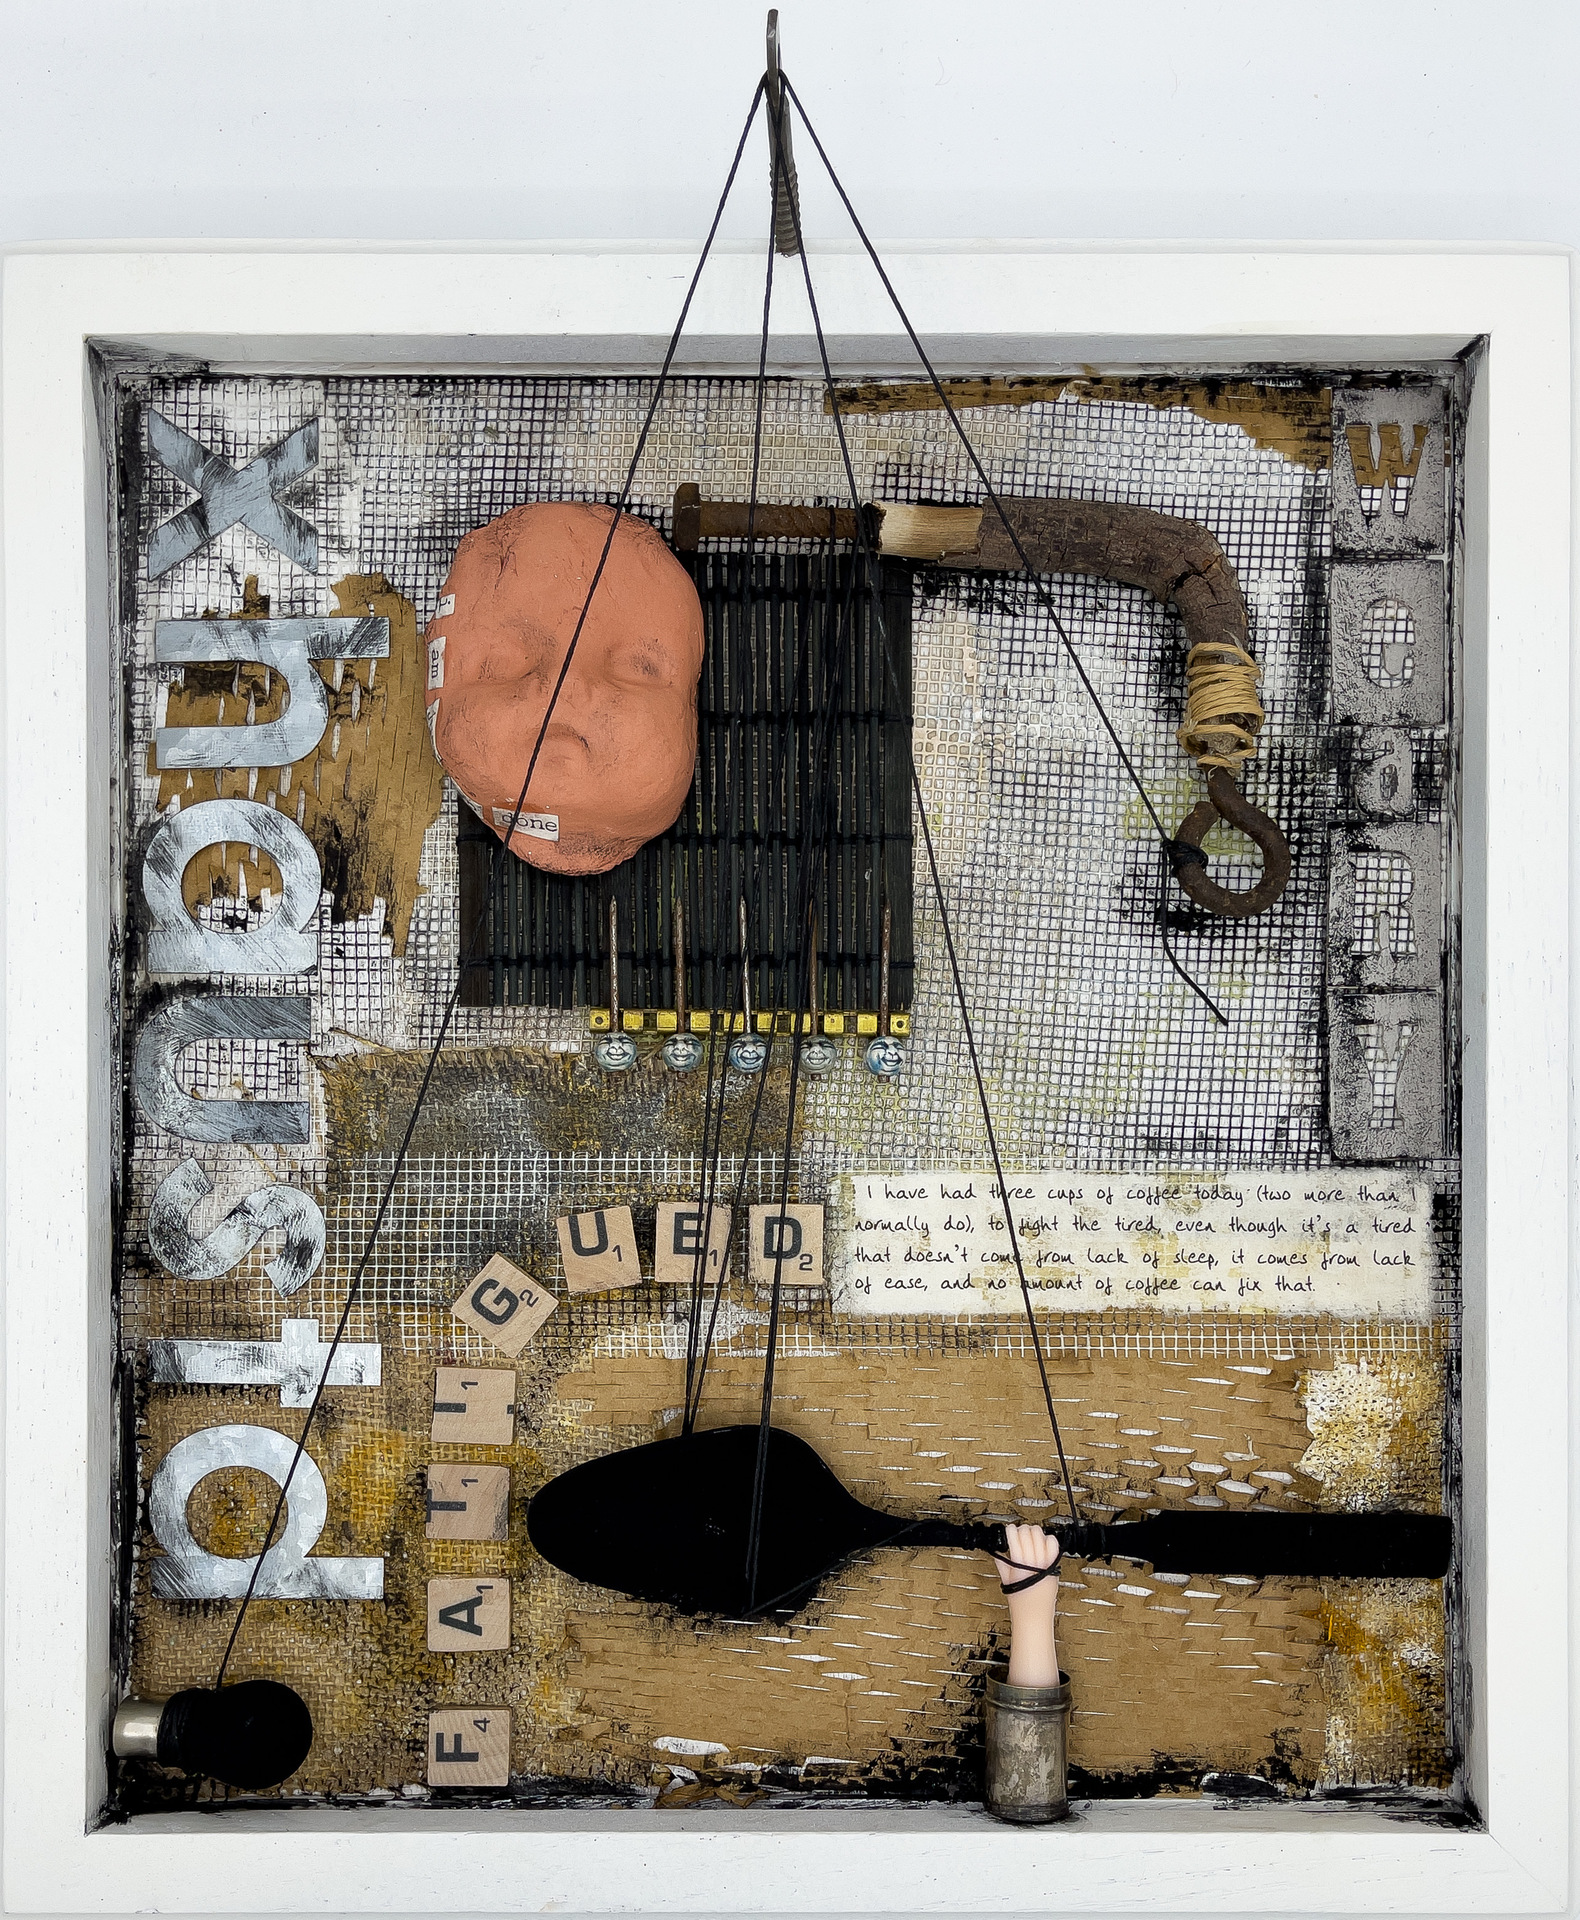 Monica Marks mixed media collage with text and figures depicting the exhaustion of care givers during the Covid 19 pandemic.